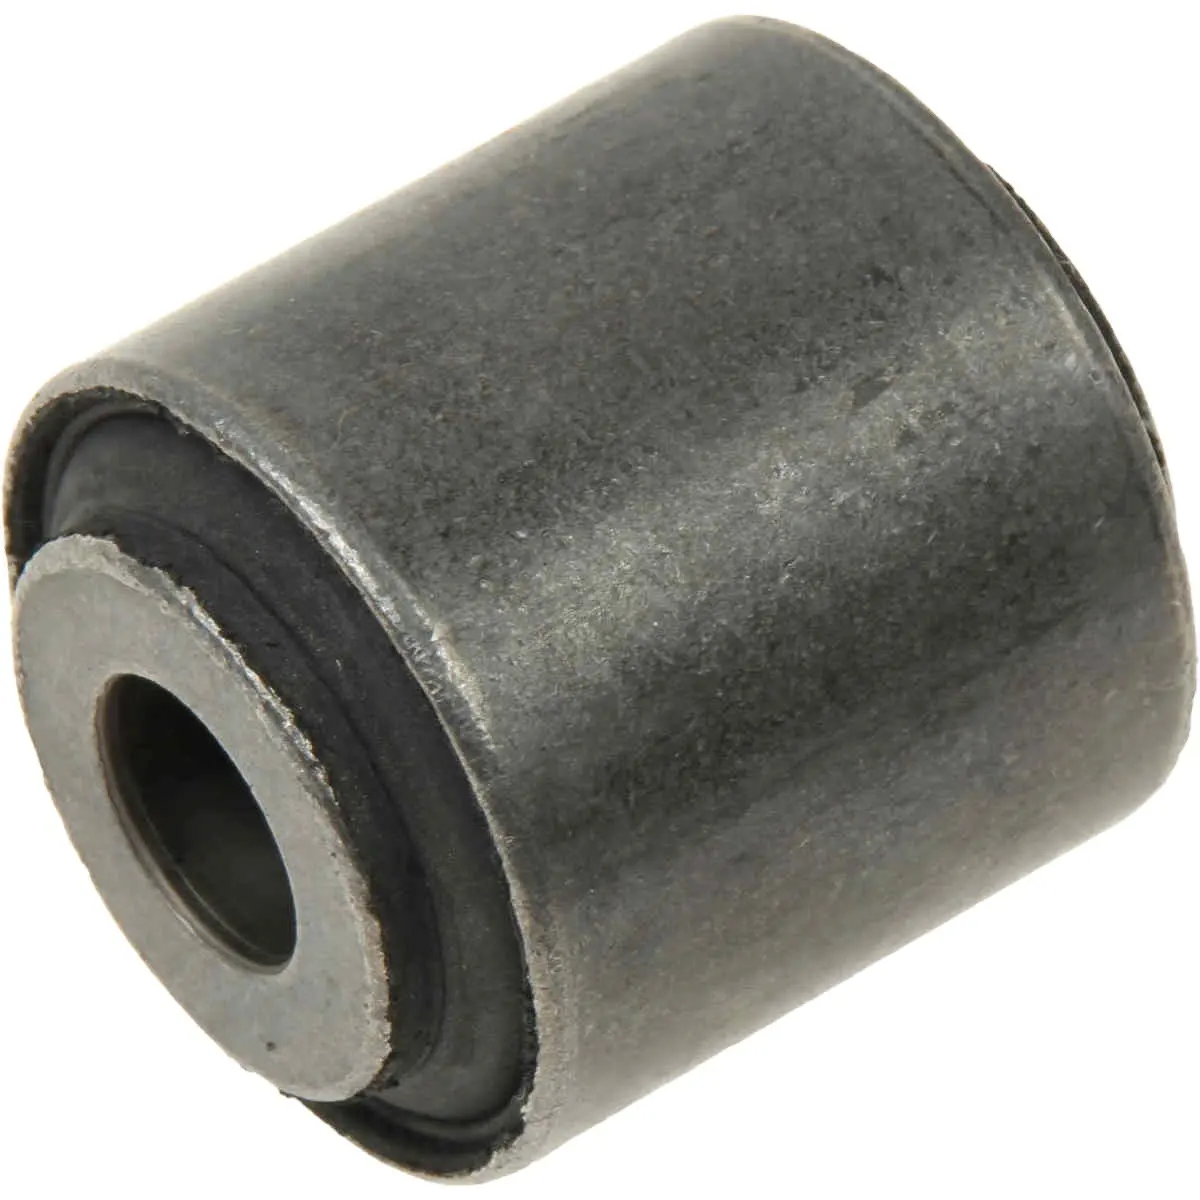 52622-S7A-014 Car Spare Parts Lower Arm Bushing For Honda Civic